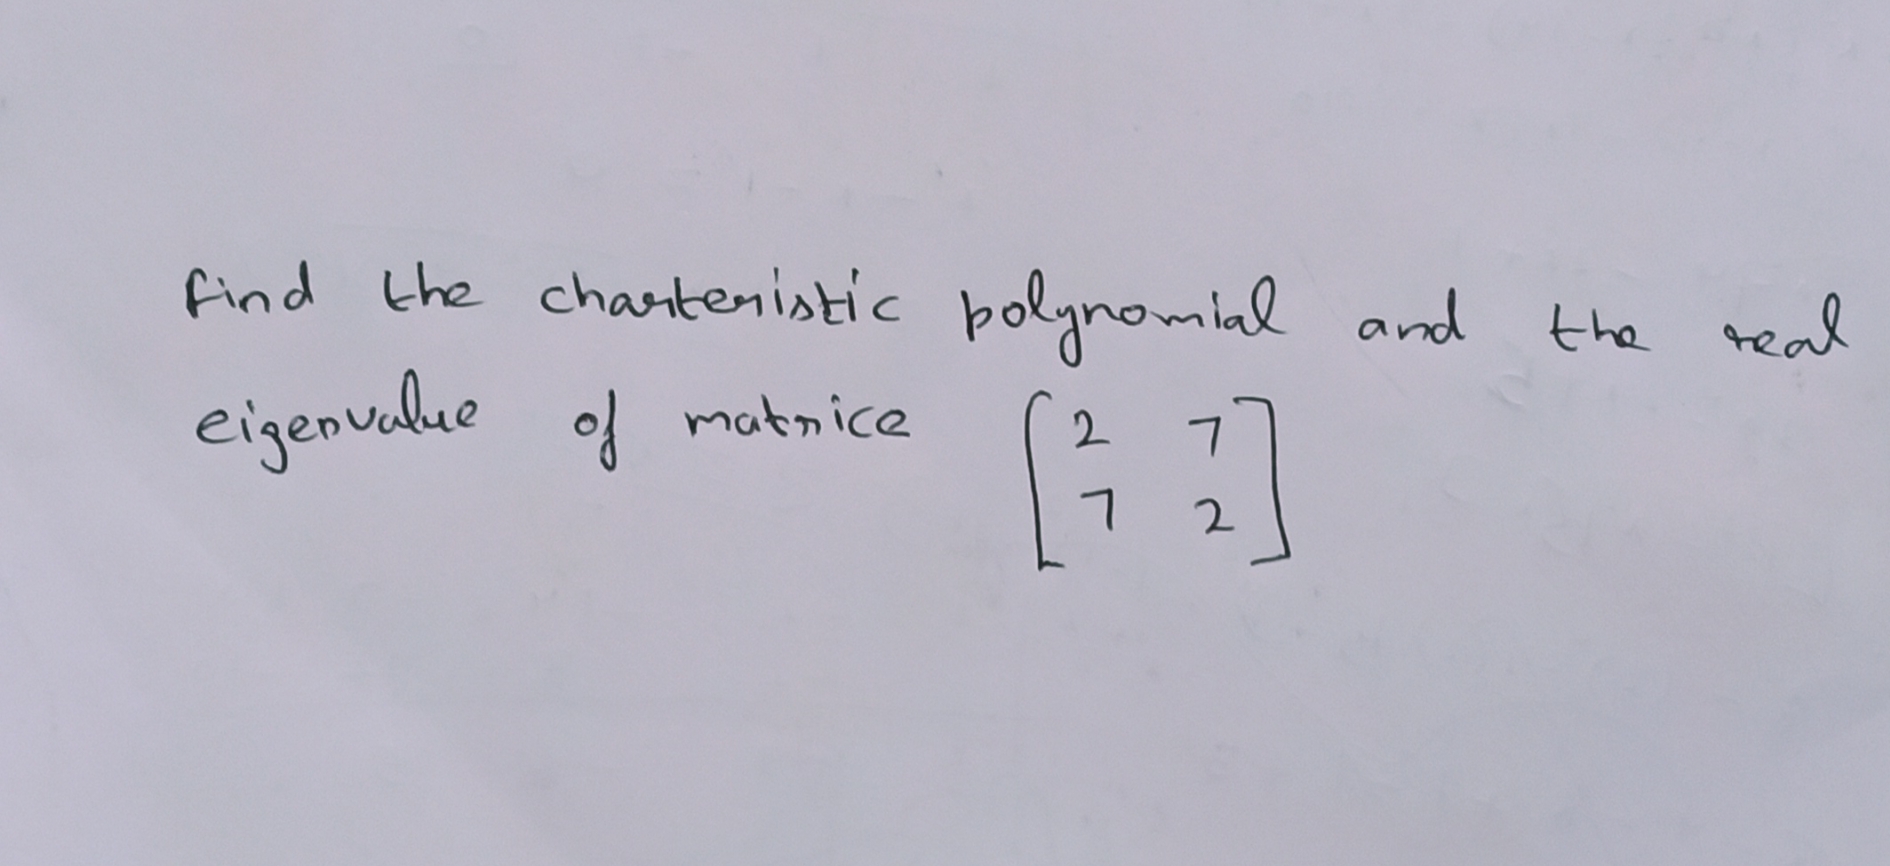 find the chartenistic polgnomial and
the real
eigenualue of matnice
